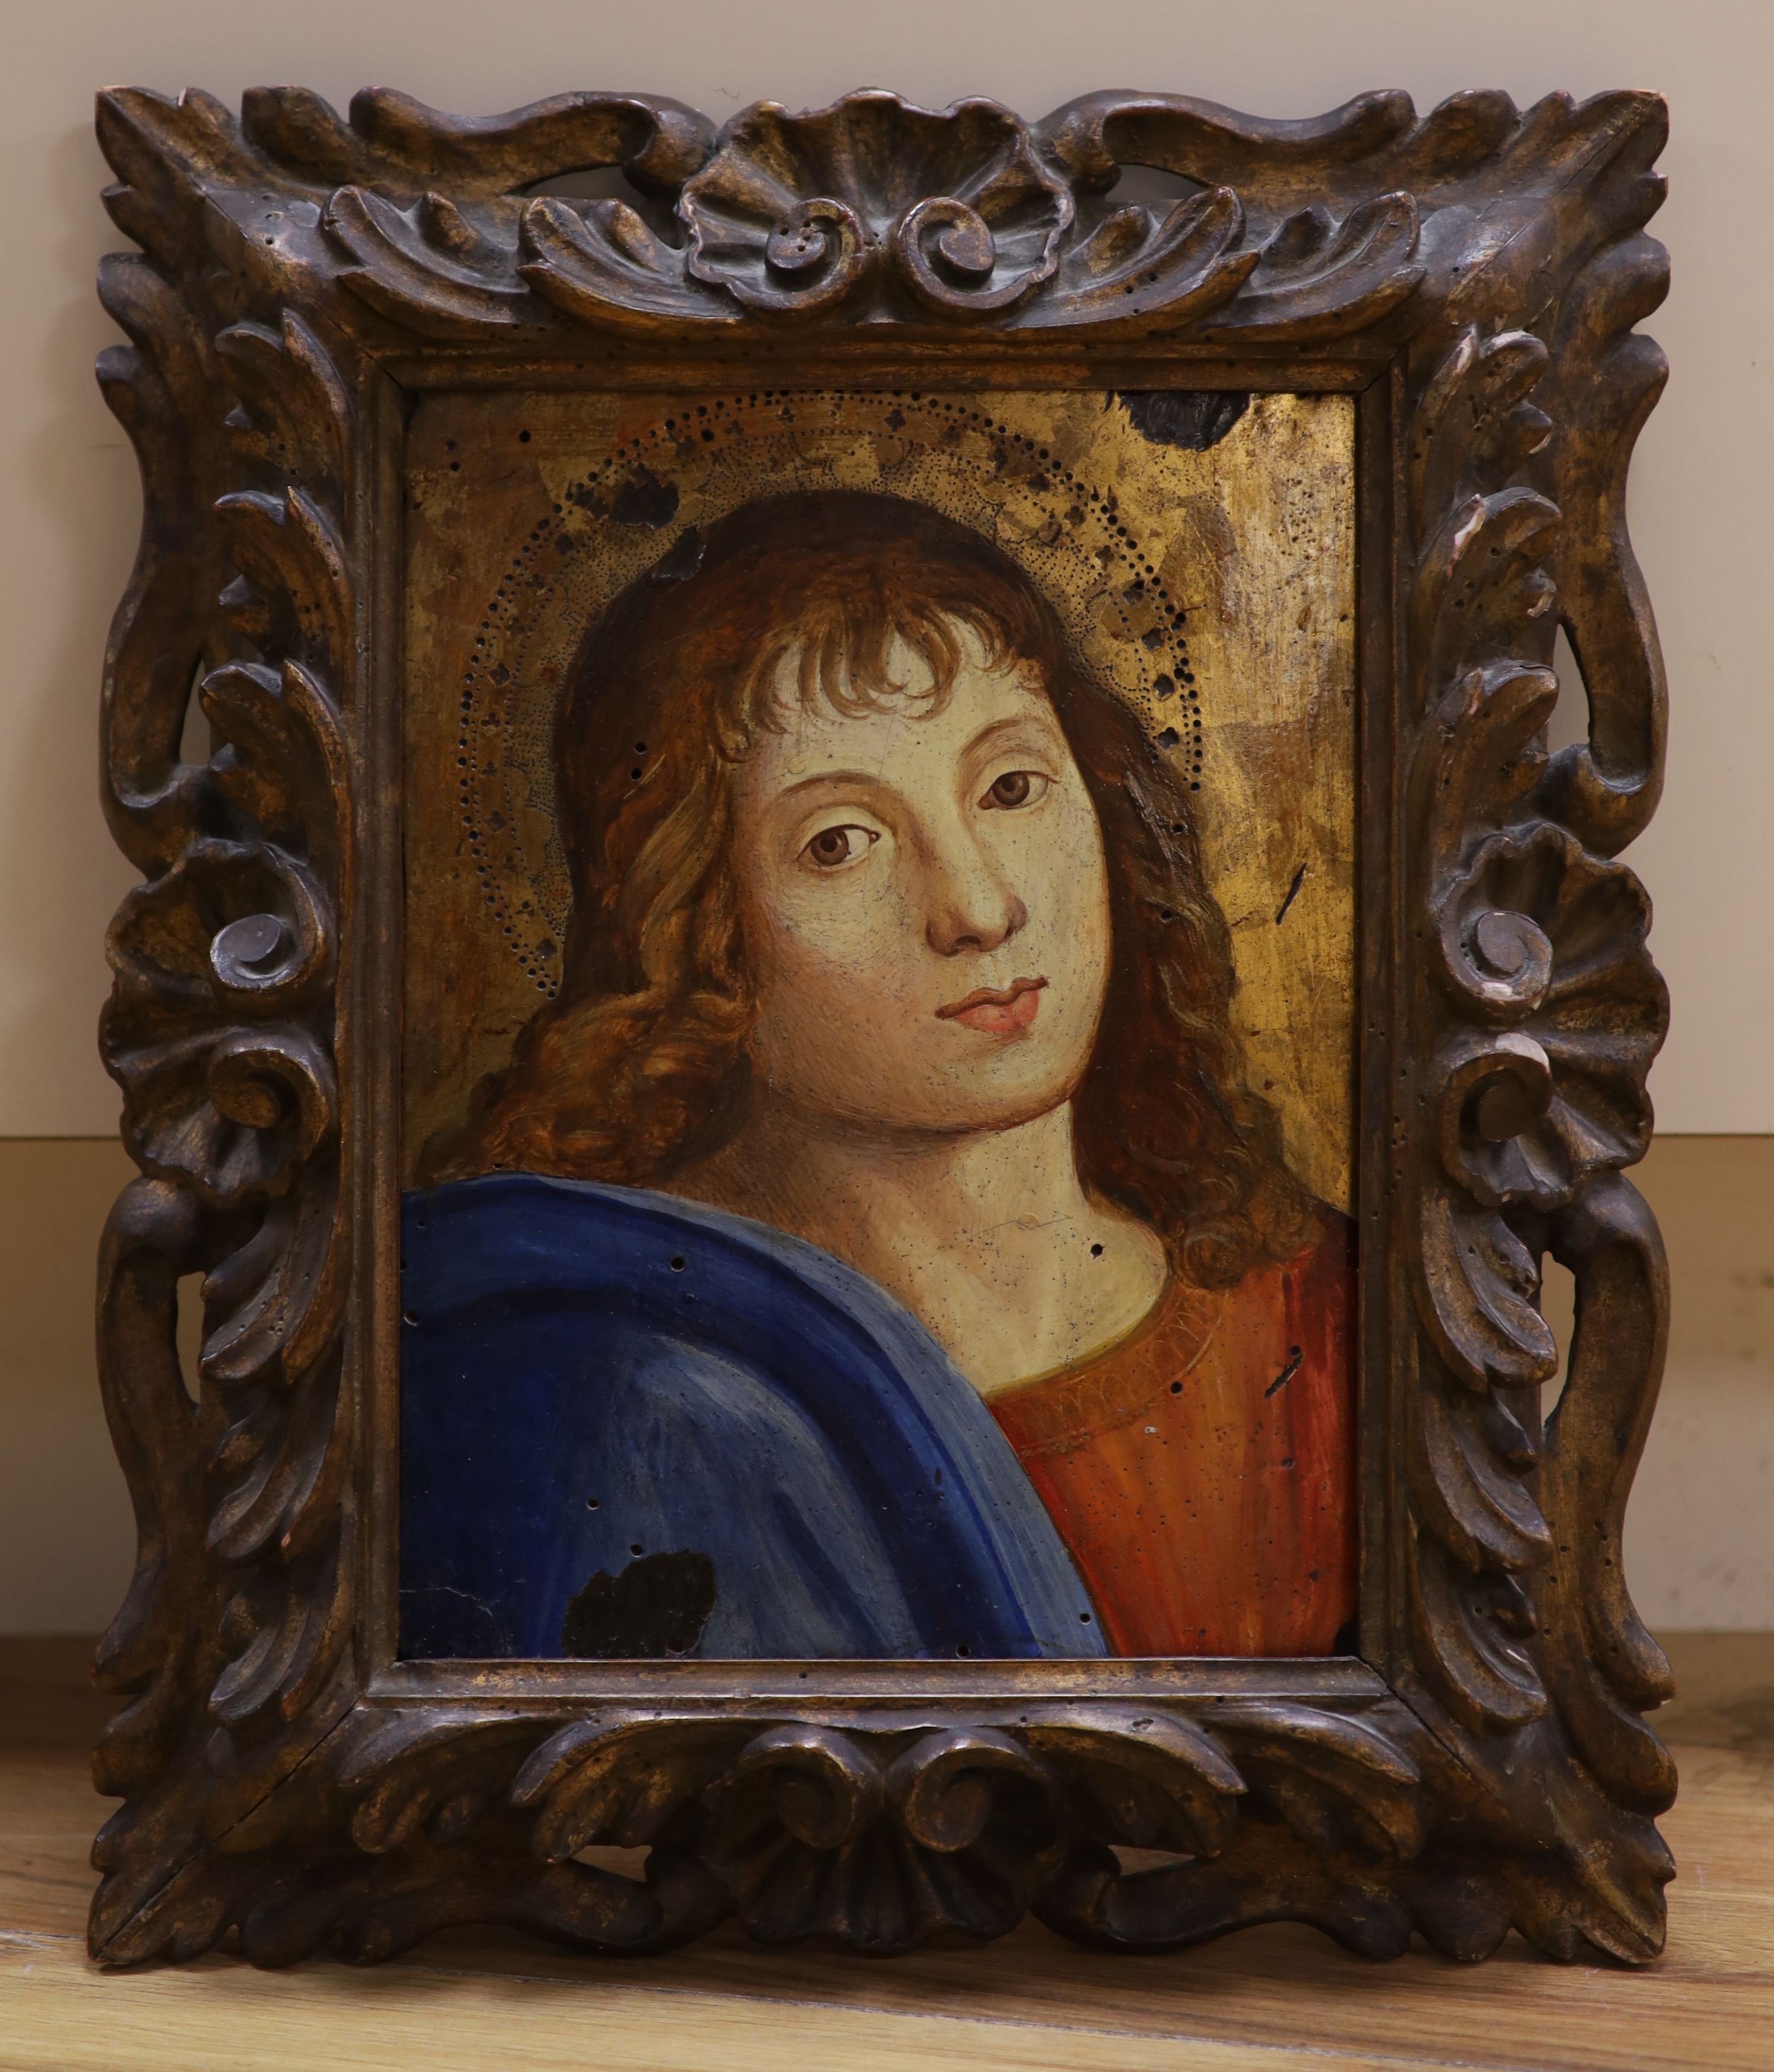 19th century Italian School. Study of a saint (in the 15th century style), oil on panel, in a carved giltwood Florentine frame, 10